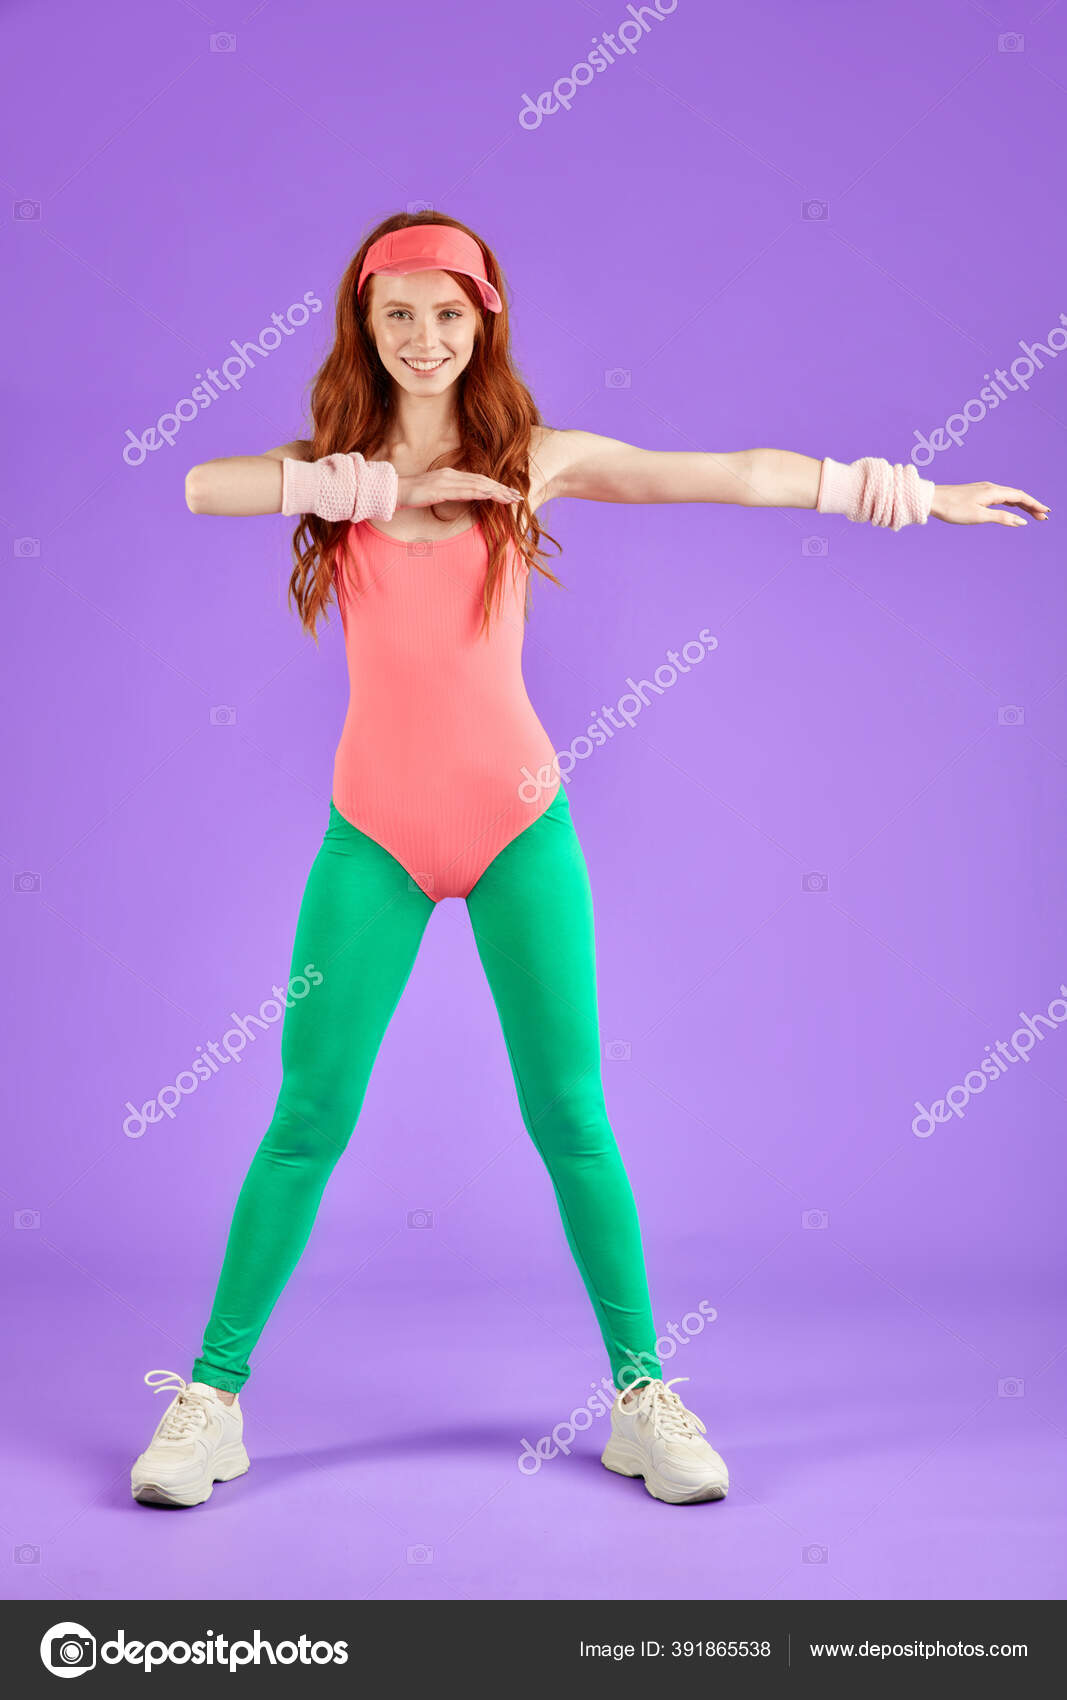 Red-headed girl wears aerobics clothes in 80s style looks in